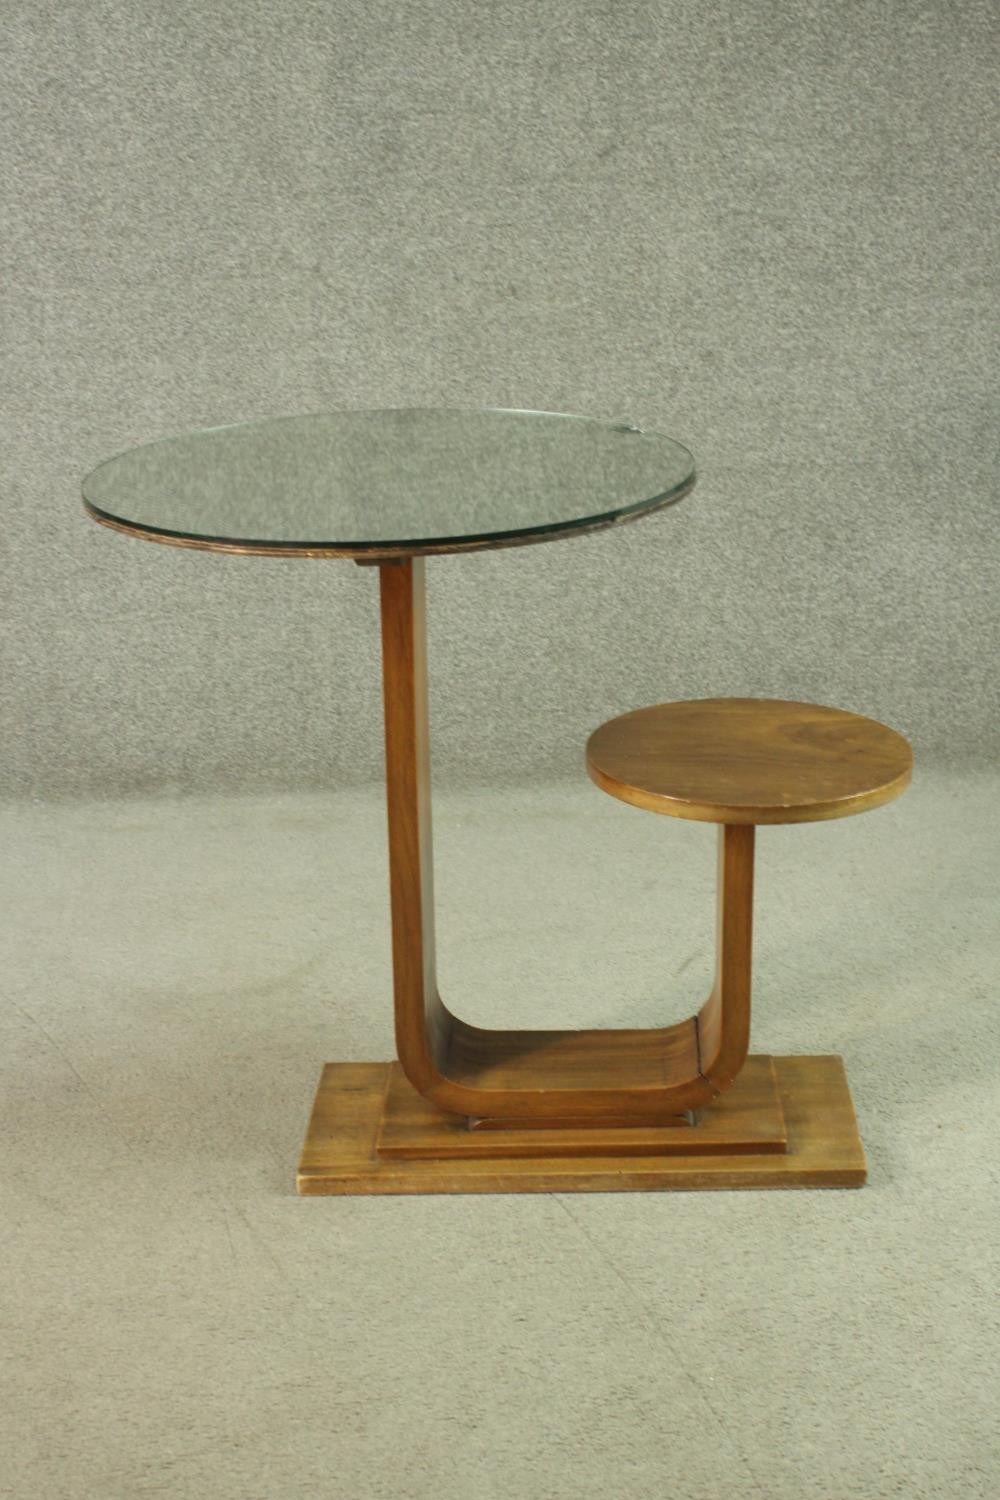 An Art Deco teak table and stool, with a circular glass table top, on a support which curves up to a